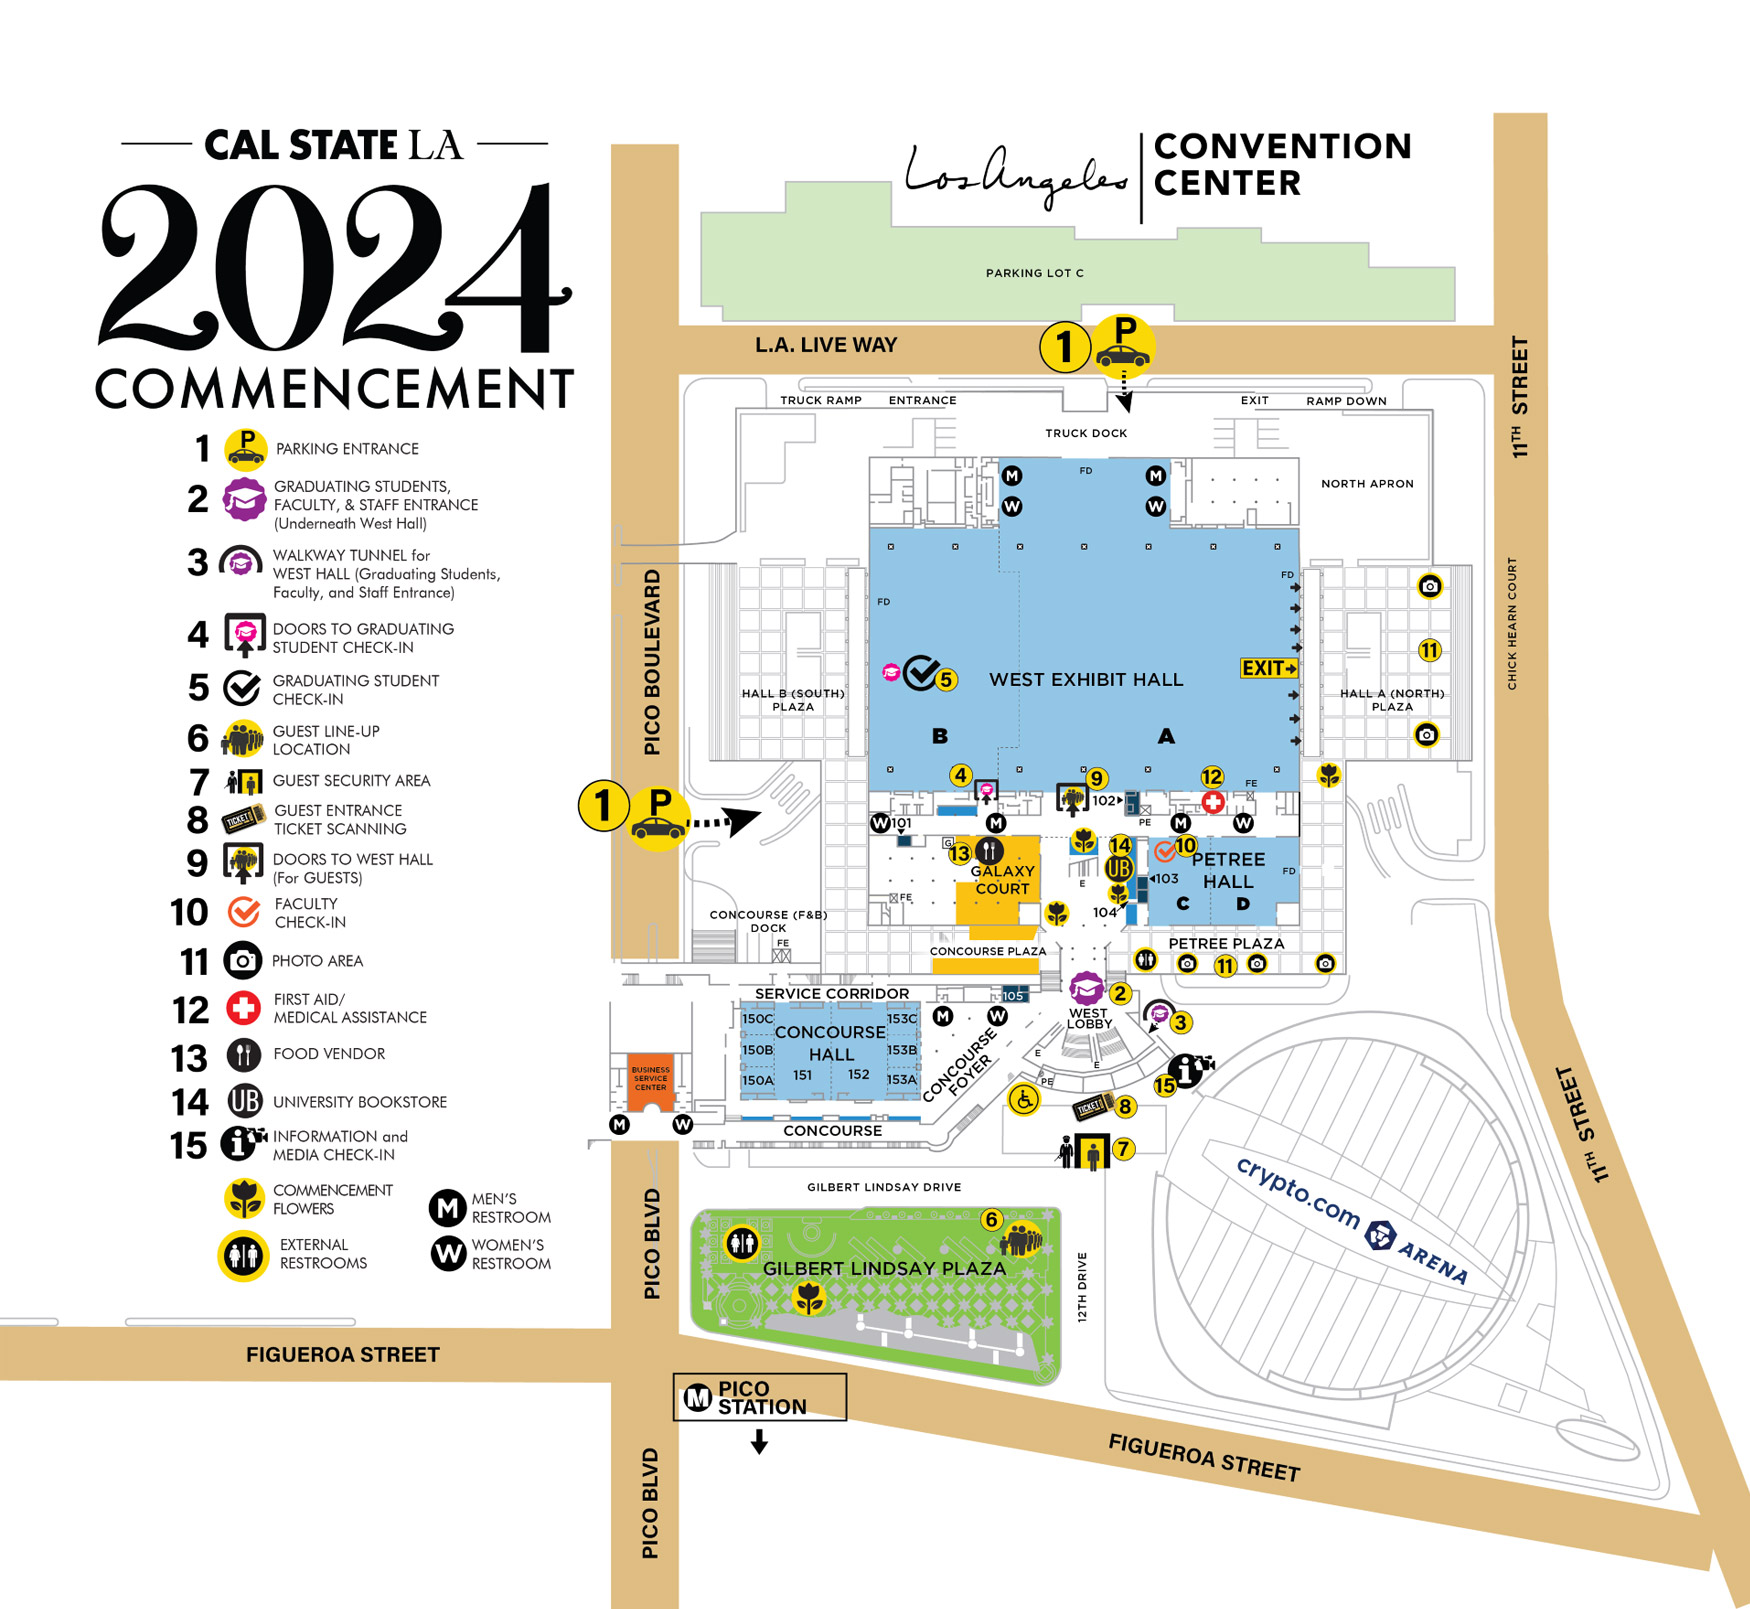 A map of the Los Angeles Convention Center